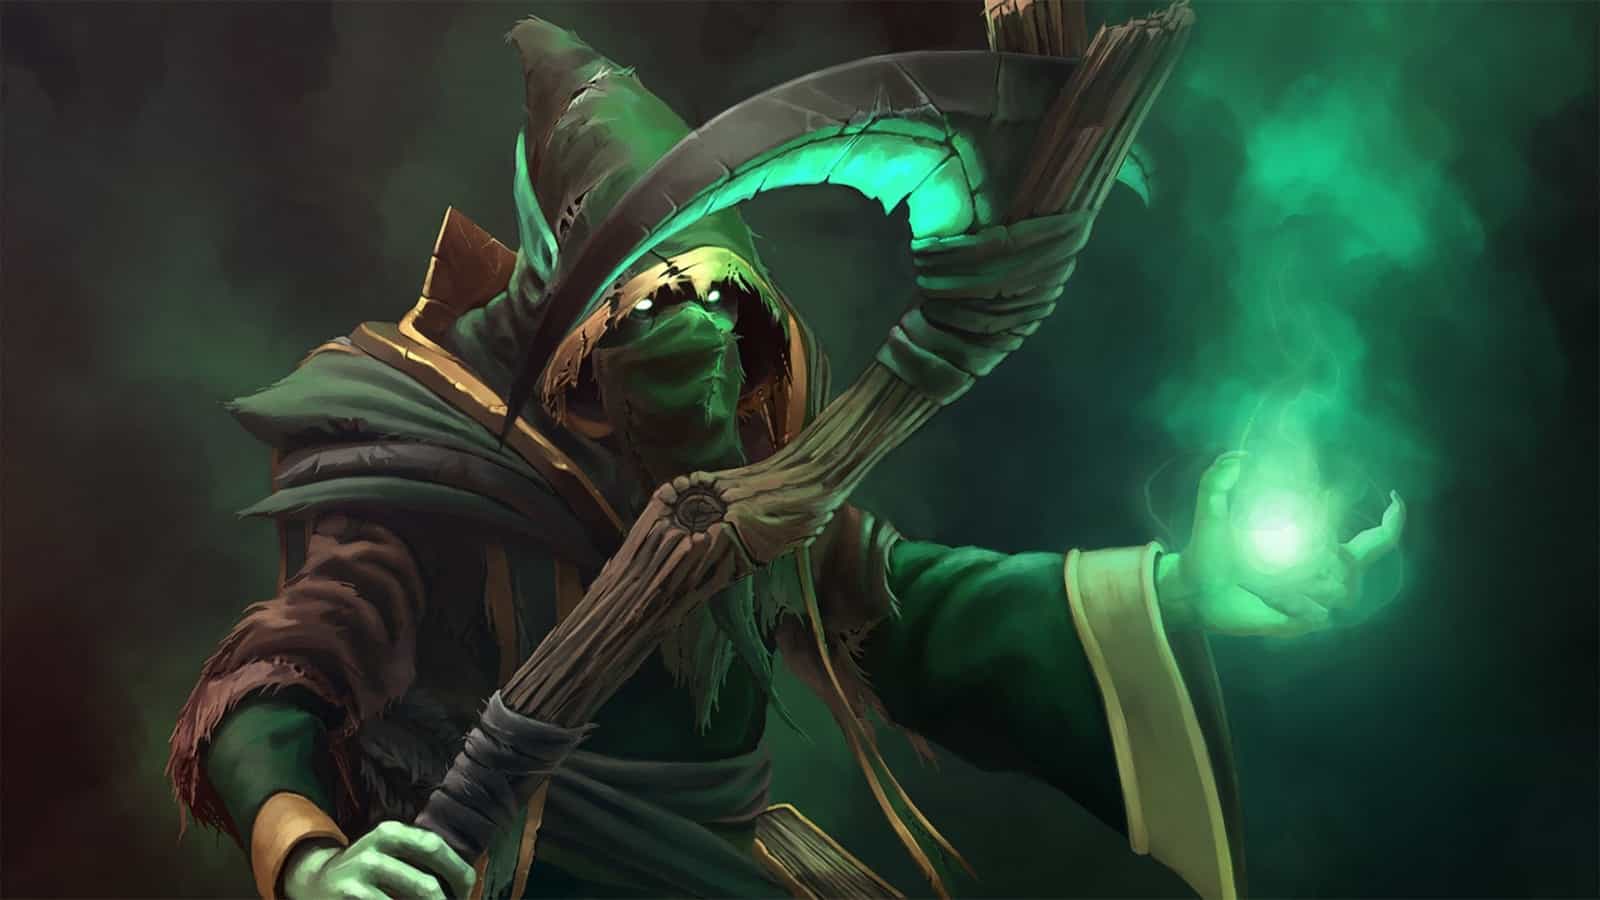 The Dota 2 hero, Necrophos, summons eldritch green flames into his hands as he watches from behind his hooded robe